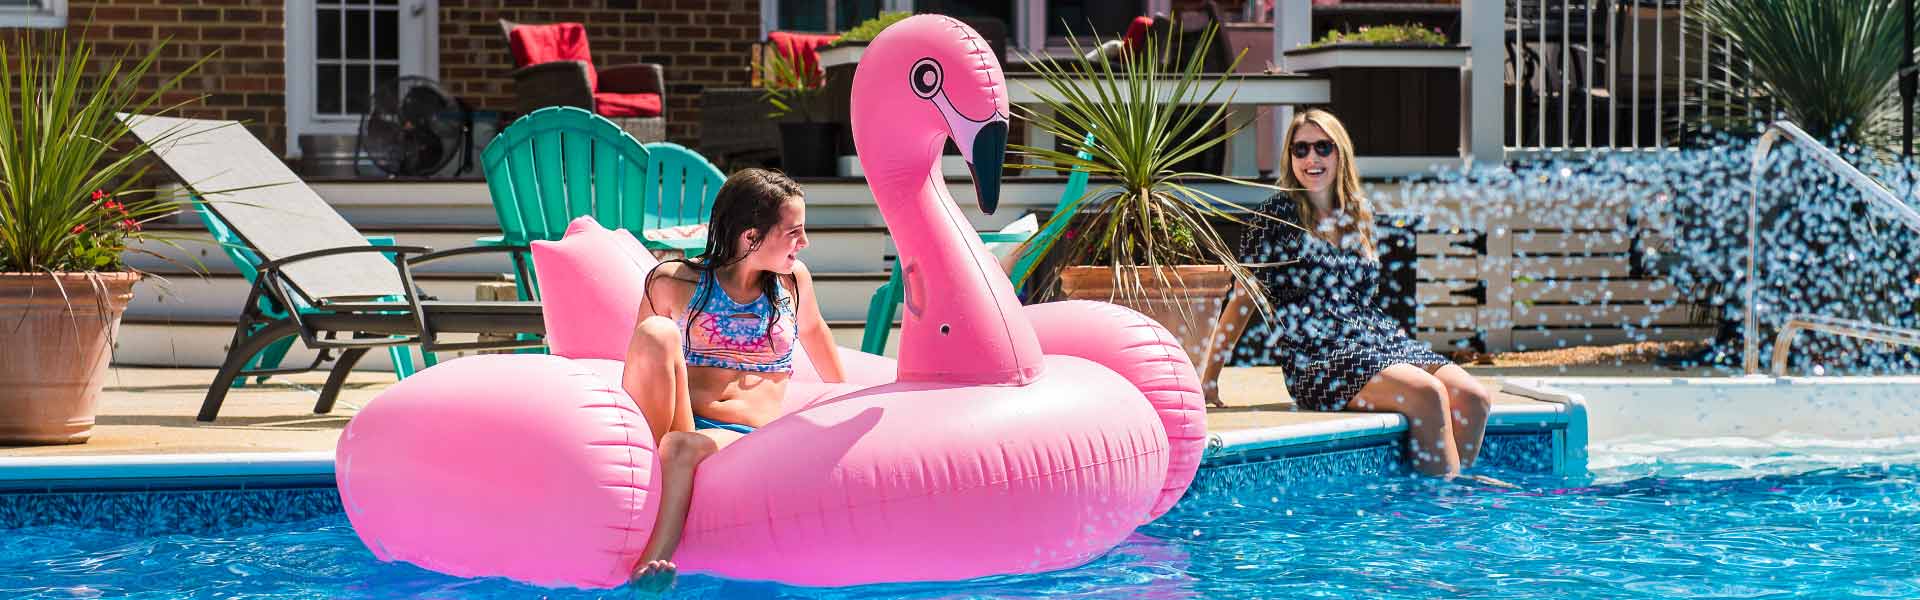 Little girl on flamingo float by a clean swimming pool